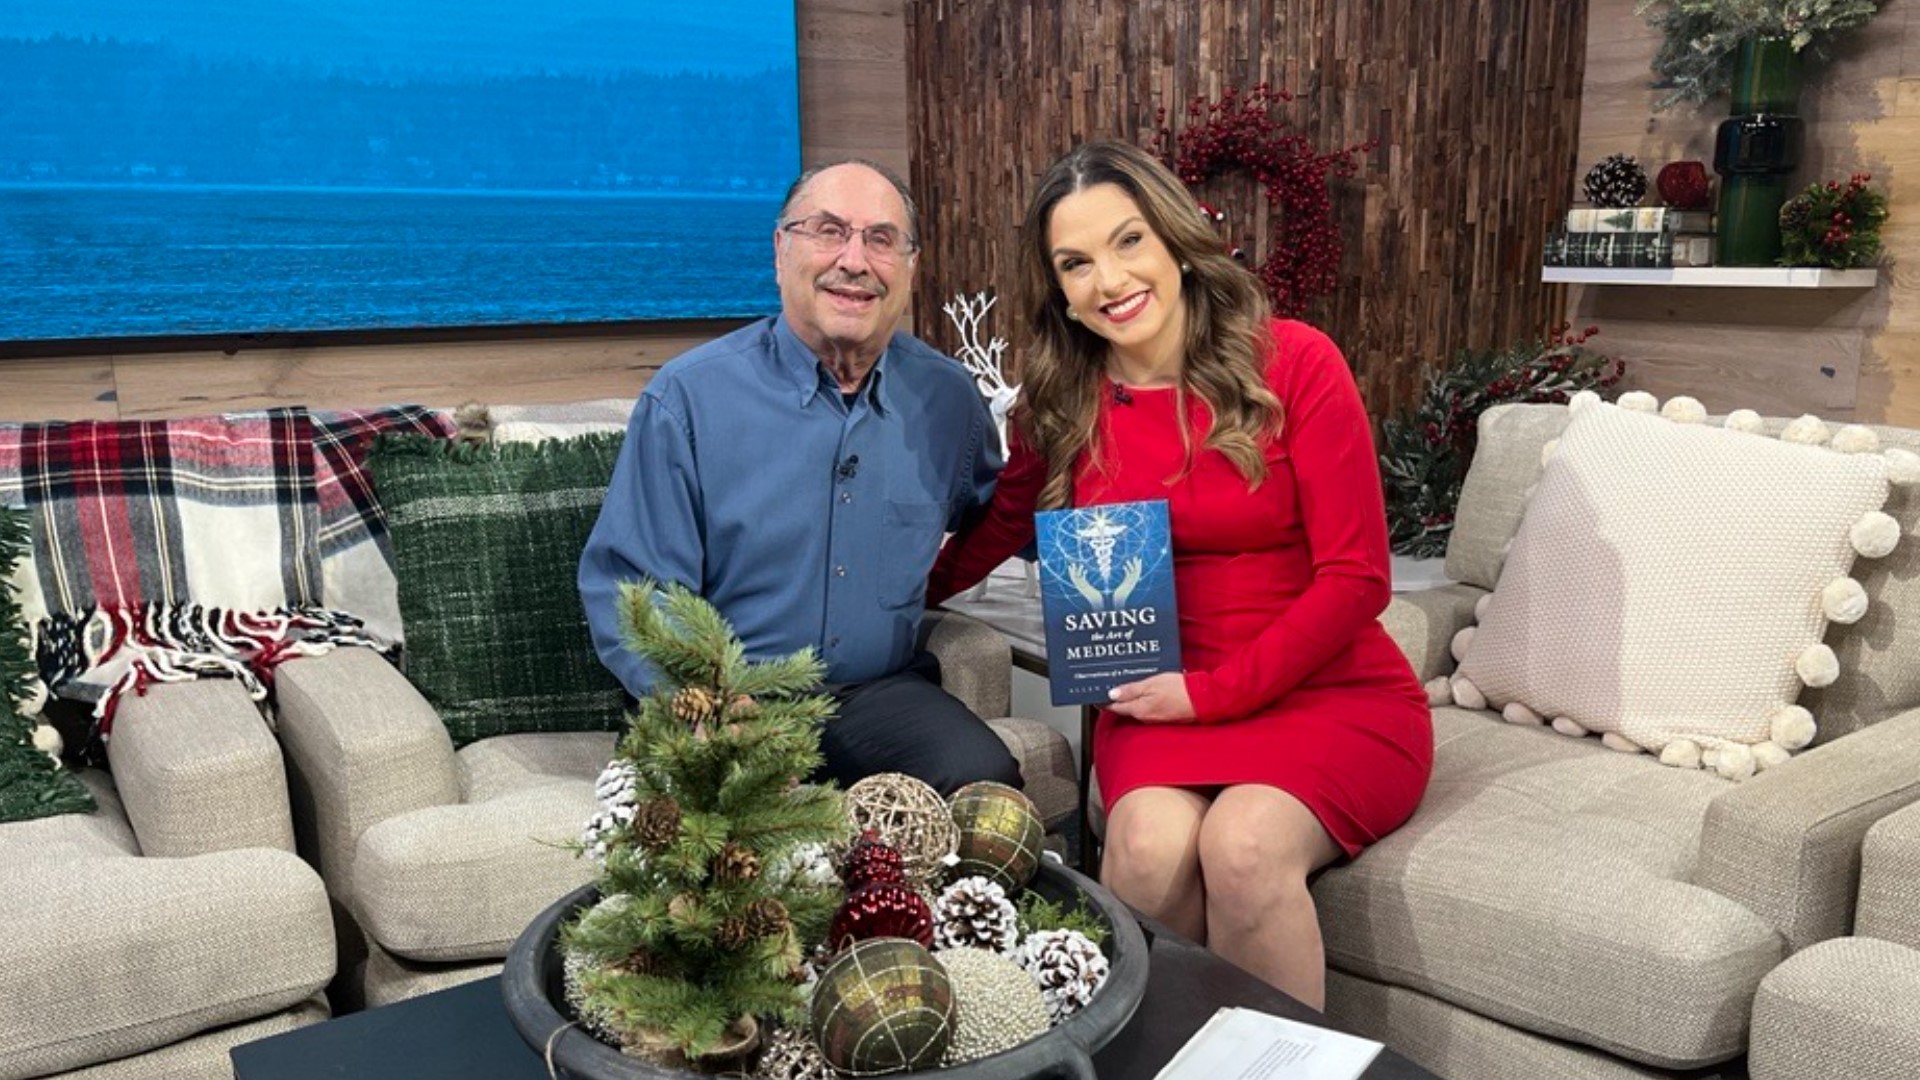 Retired Endocrinologist Allen Susssman chats with Amity about his new book about the importance of compassion, empathy and respect in medicine.